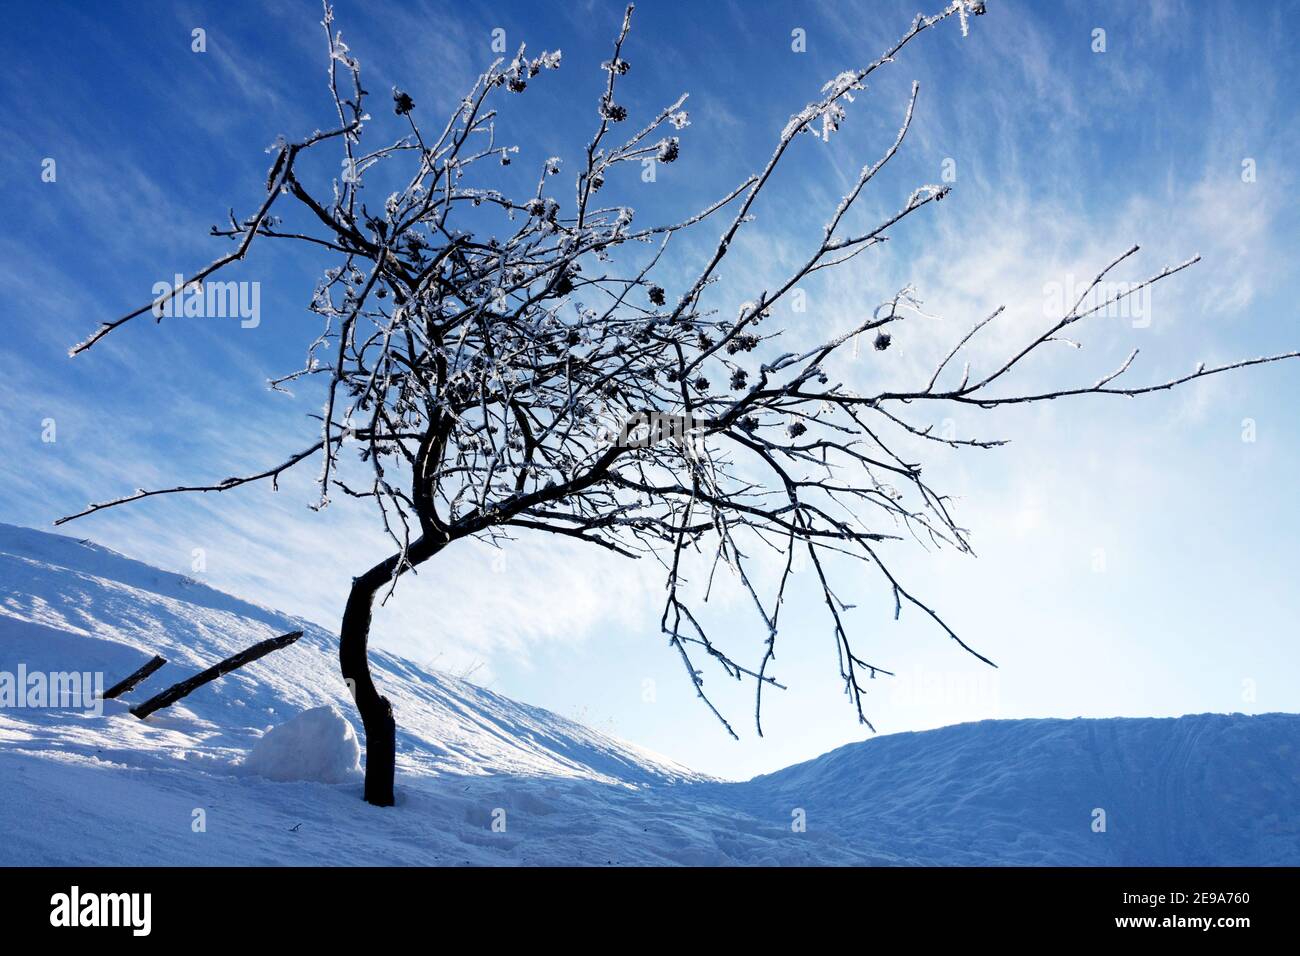 Small tree in the snowdrift, hoar frost, snow and sky Stock Photo